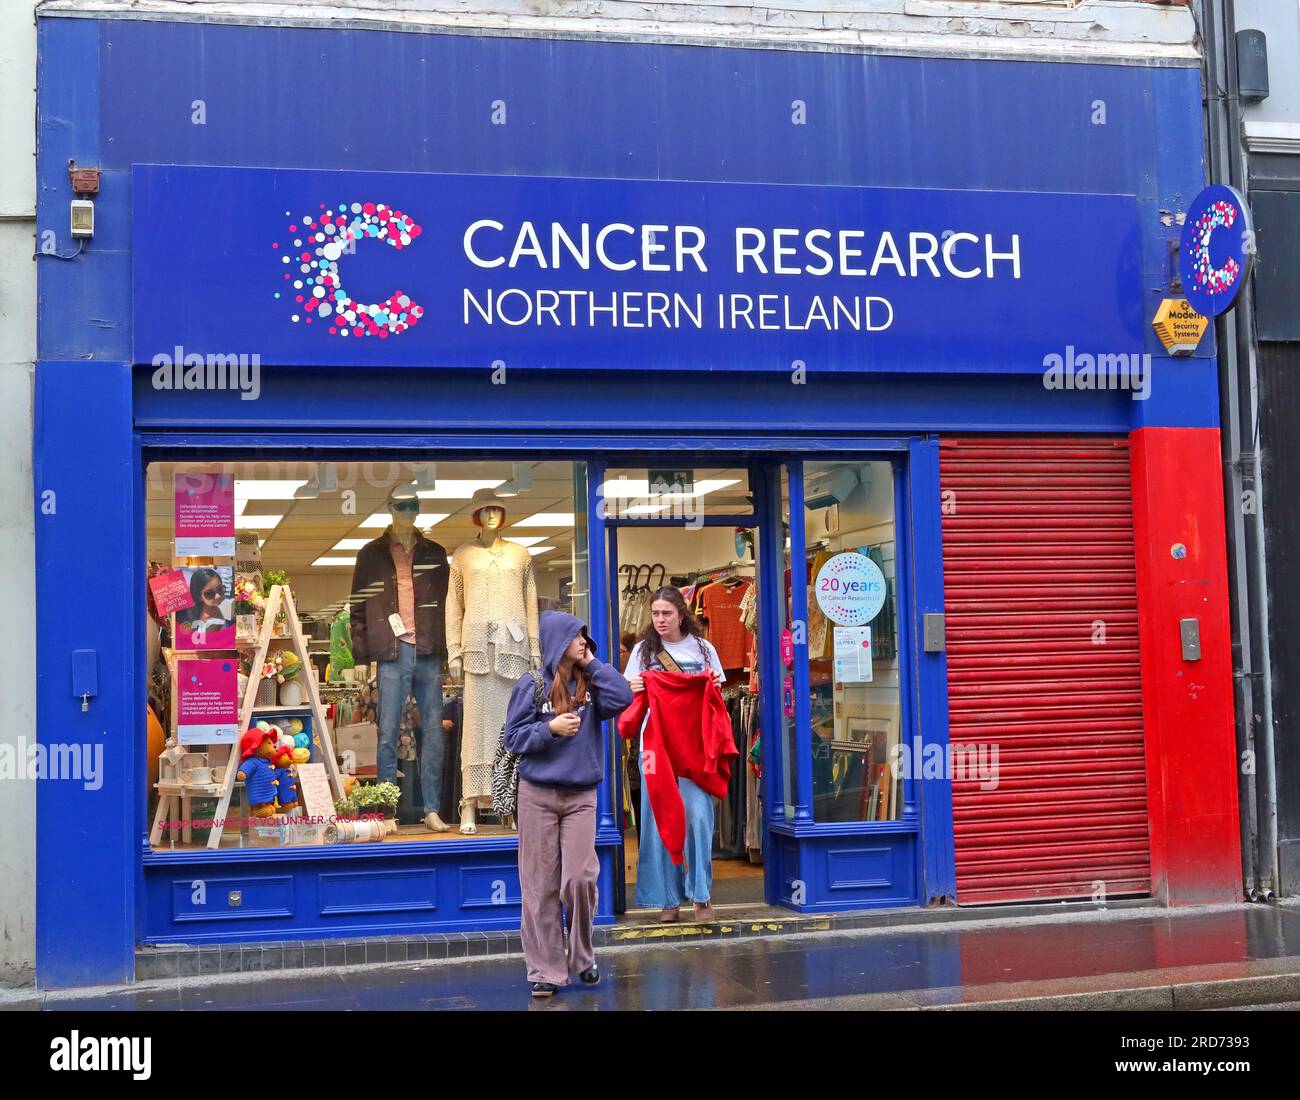 Cancer research Northern Ireland, 19 Ferryquay St, Londonderry, NI, UK,  BT48 6JB Stock Photo